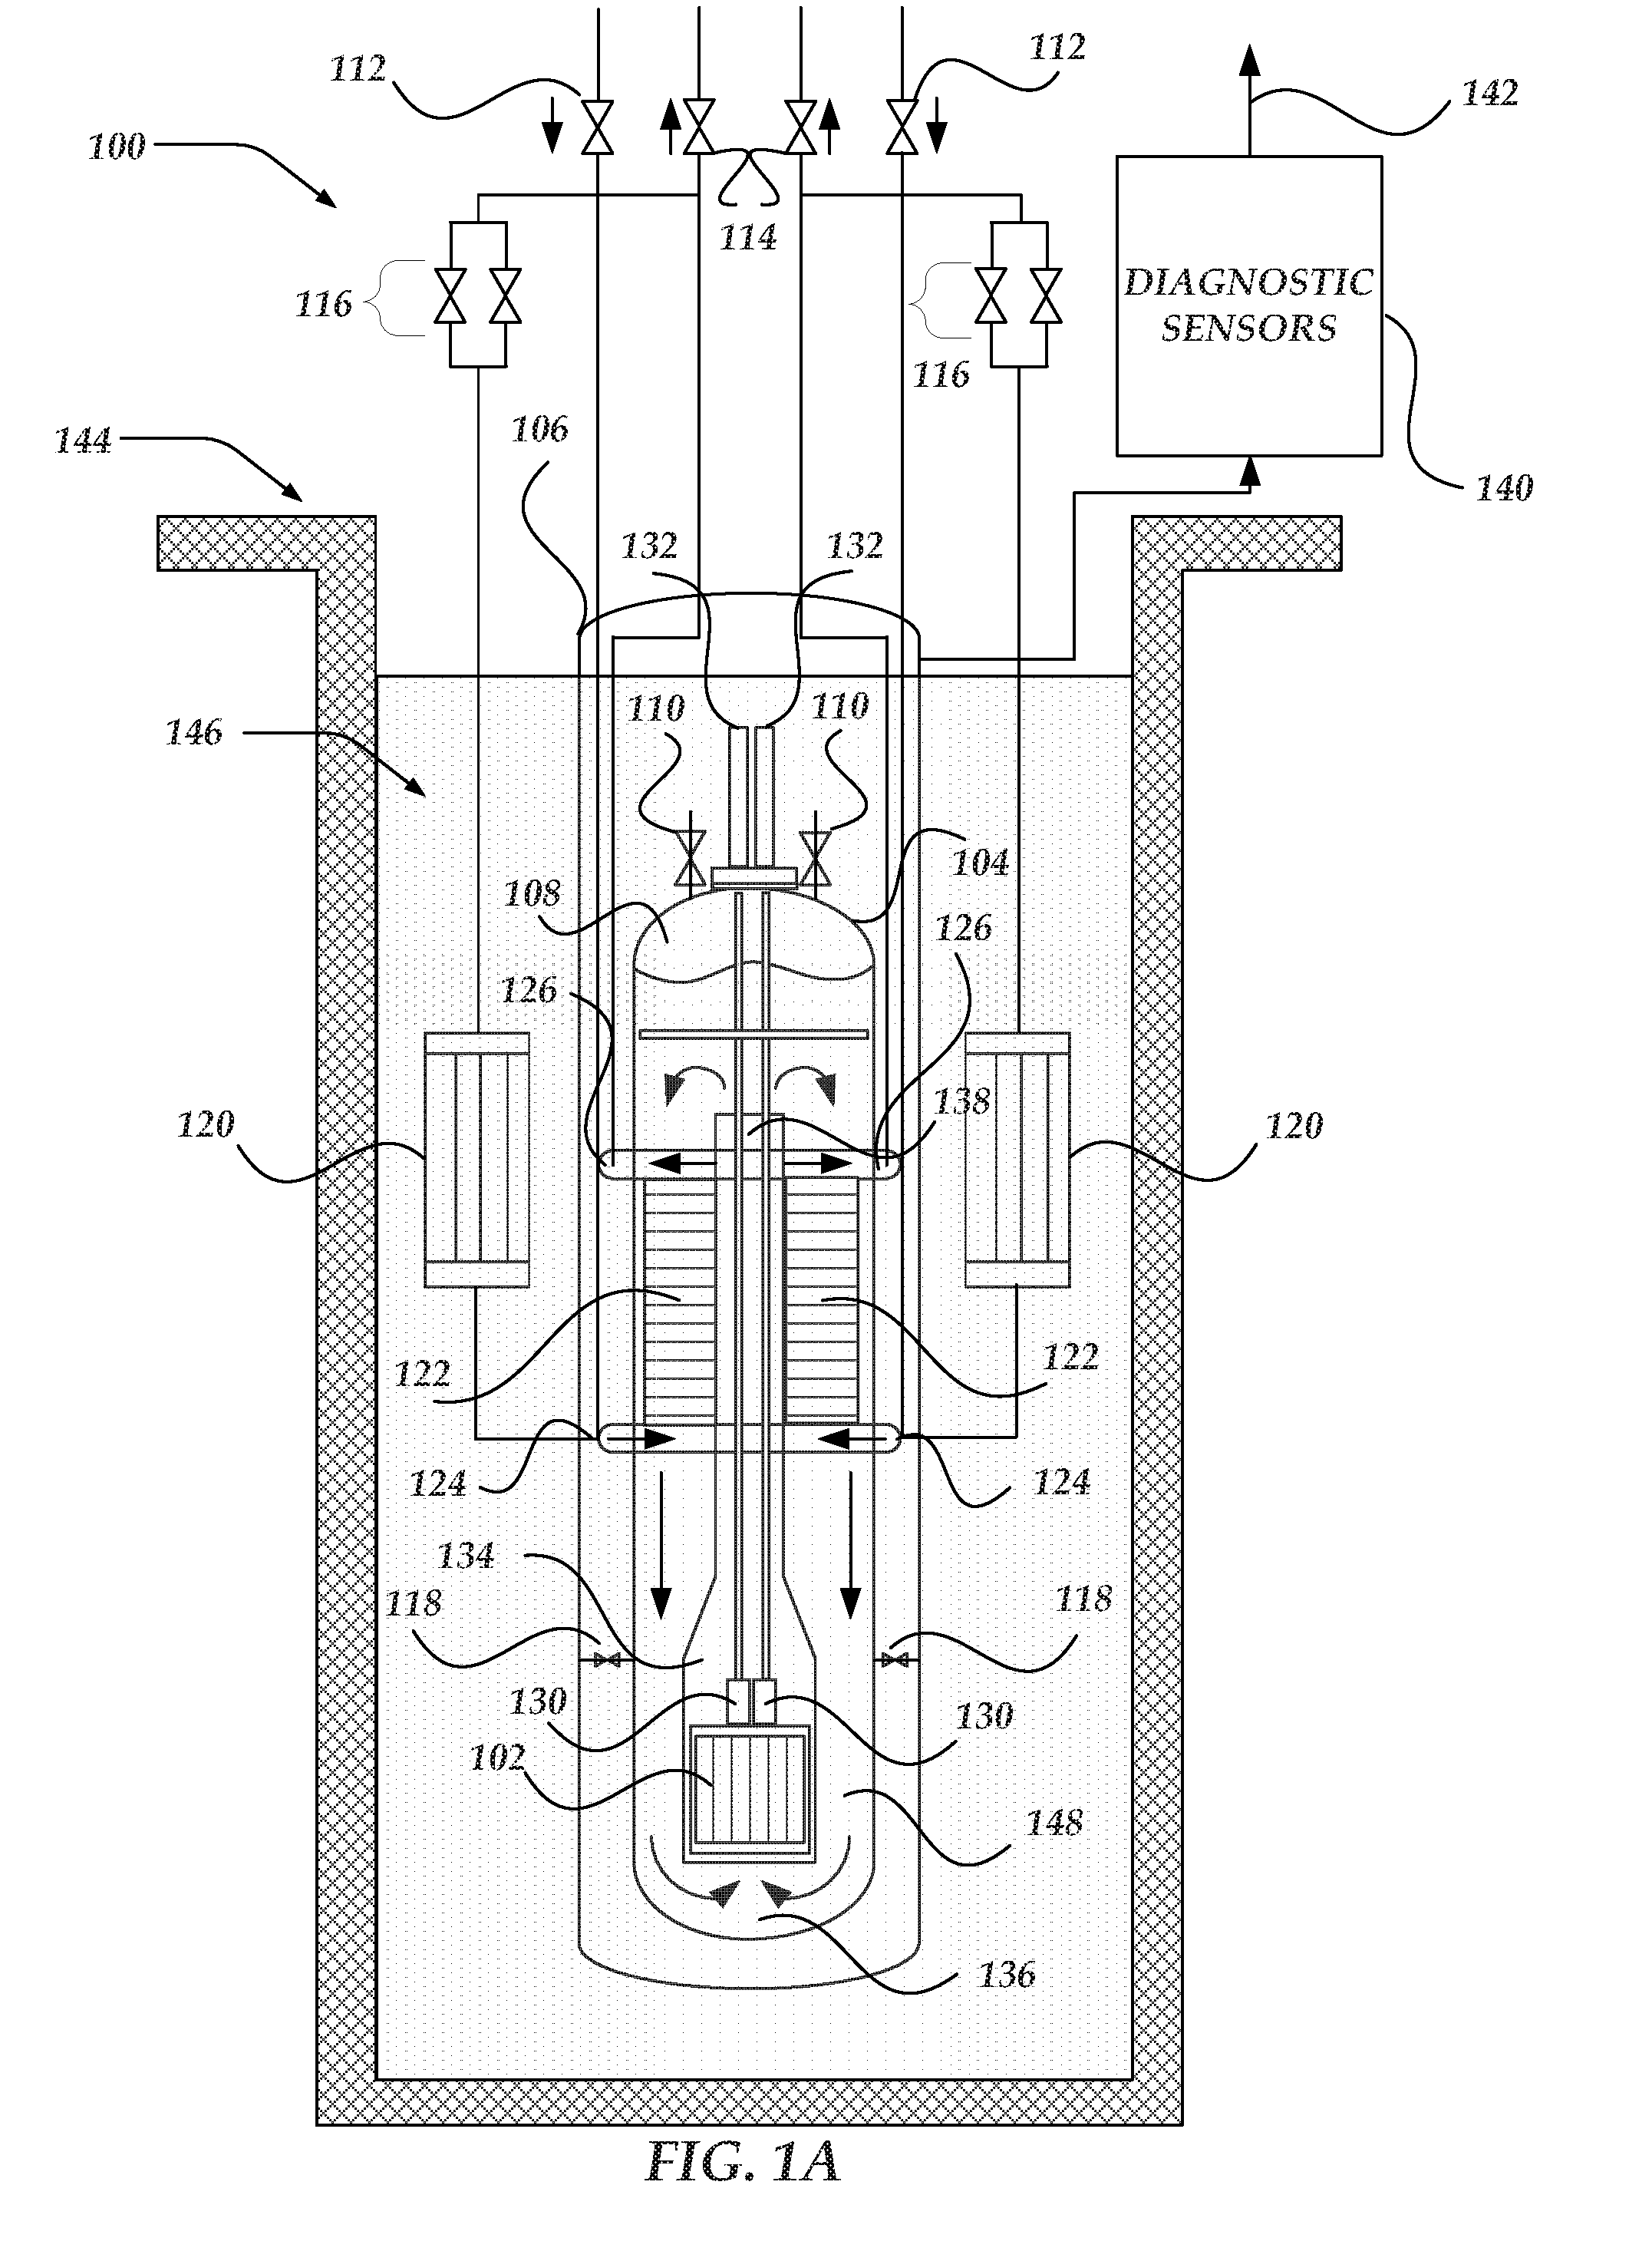 Systems and methods for monitoring a power-generation module assembly after a power-generation module shutdown event